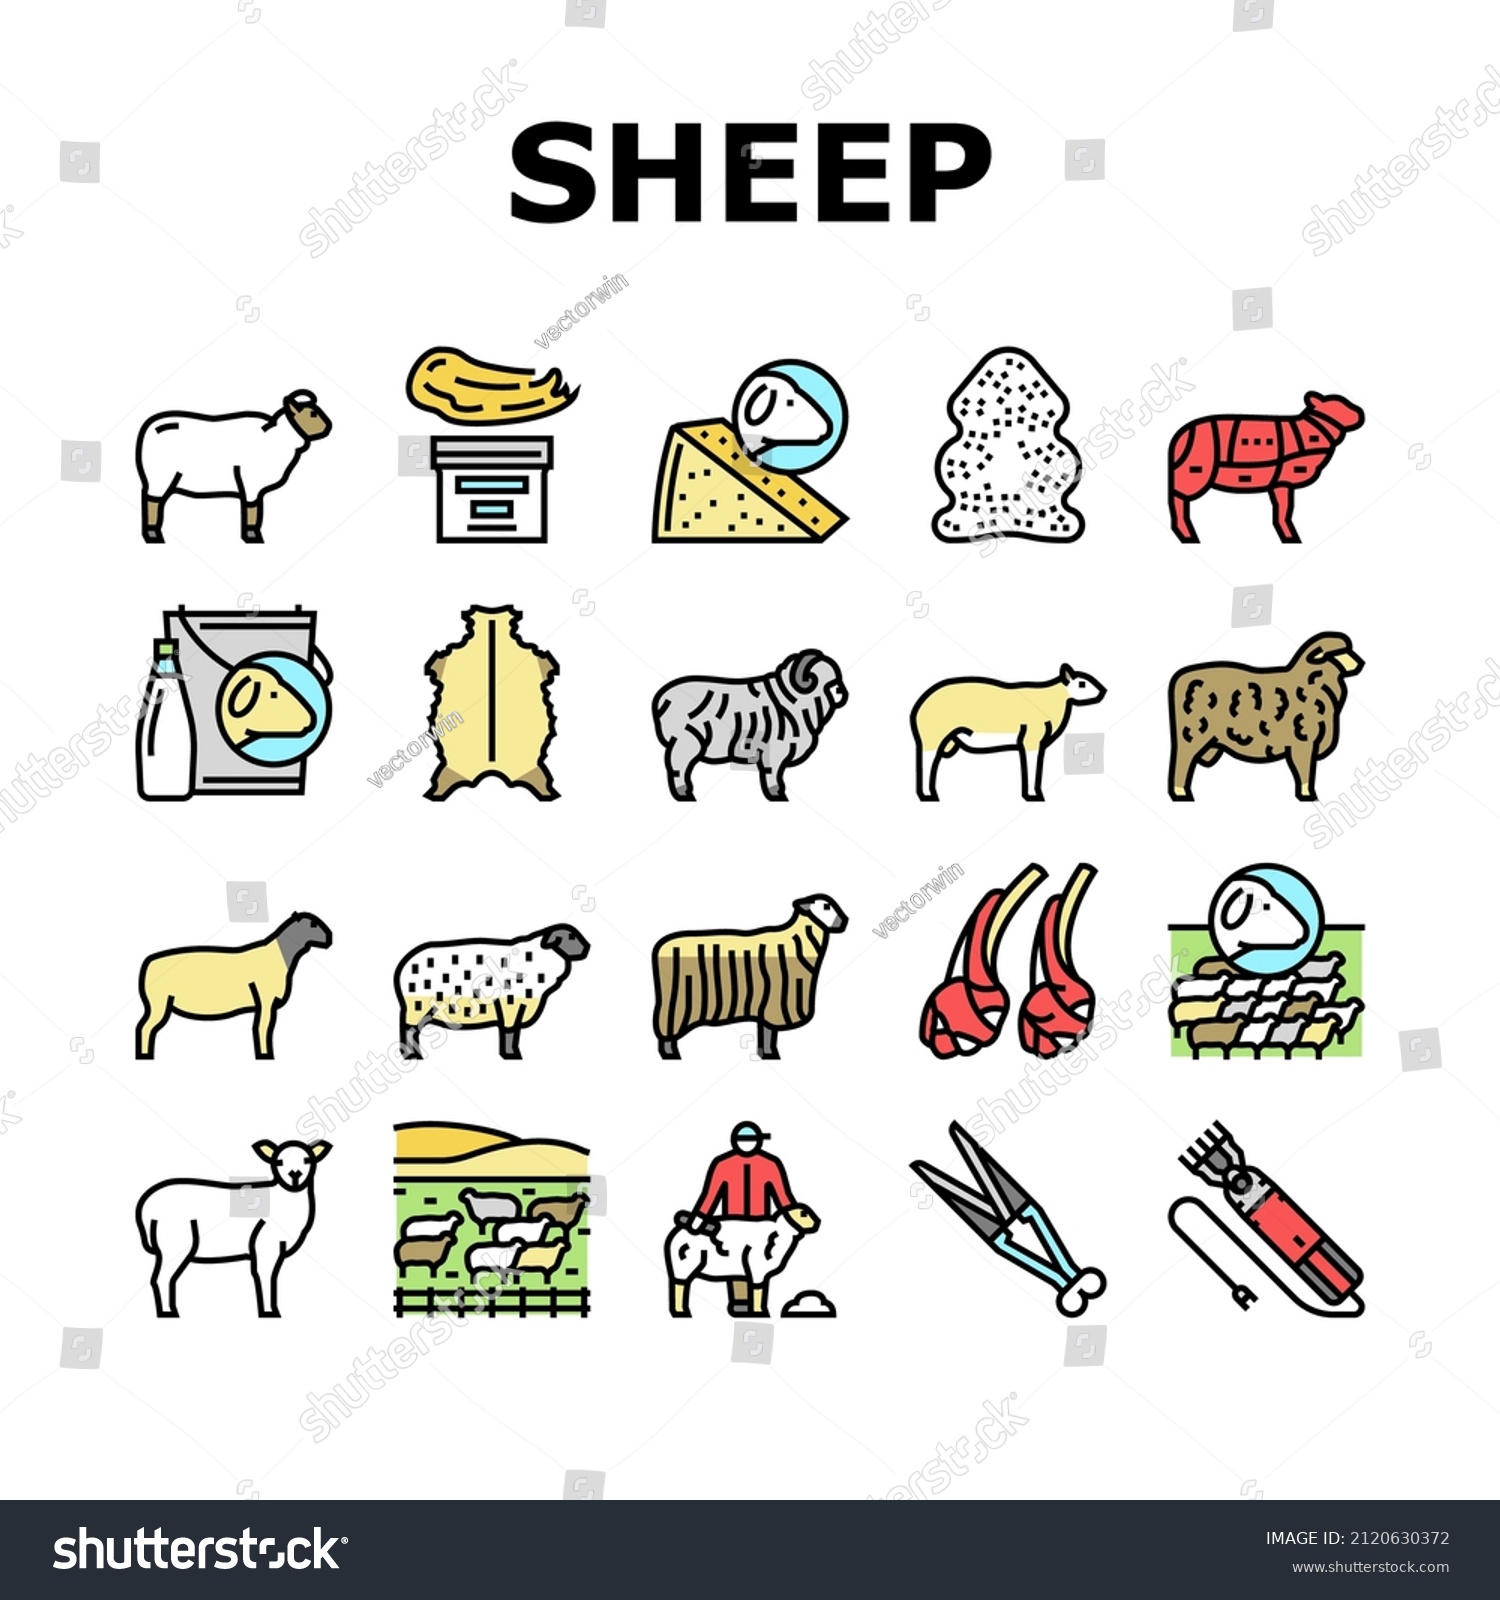 SVG of Sheep Breeding Farm Business Icons Set Vector. Sheep Breeding And Food Producing From Farmland Animal, Lamb Meat And Milk Line. Lanolin Wool Wax And Electric Devices Color Illustrations svg